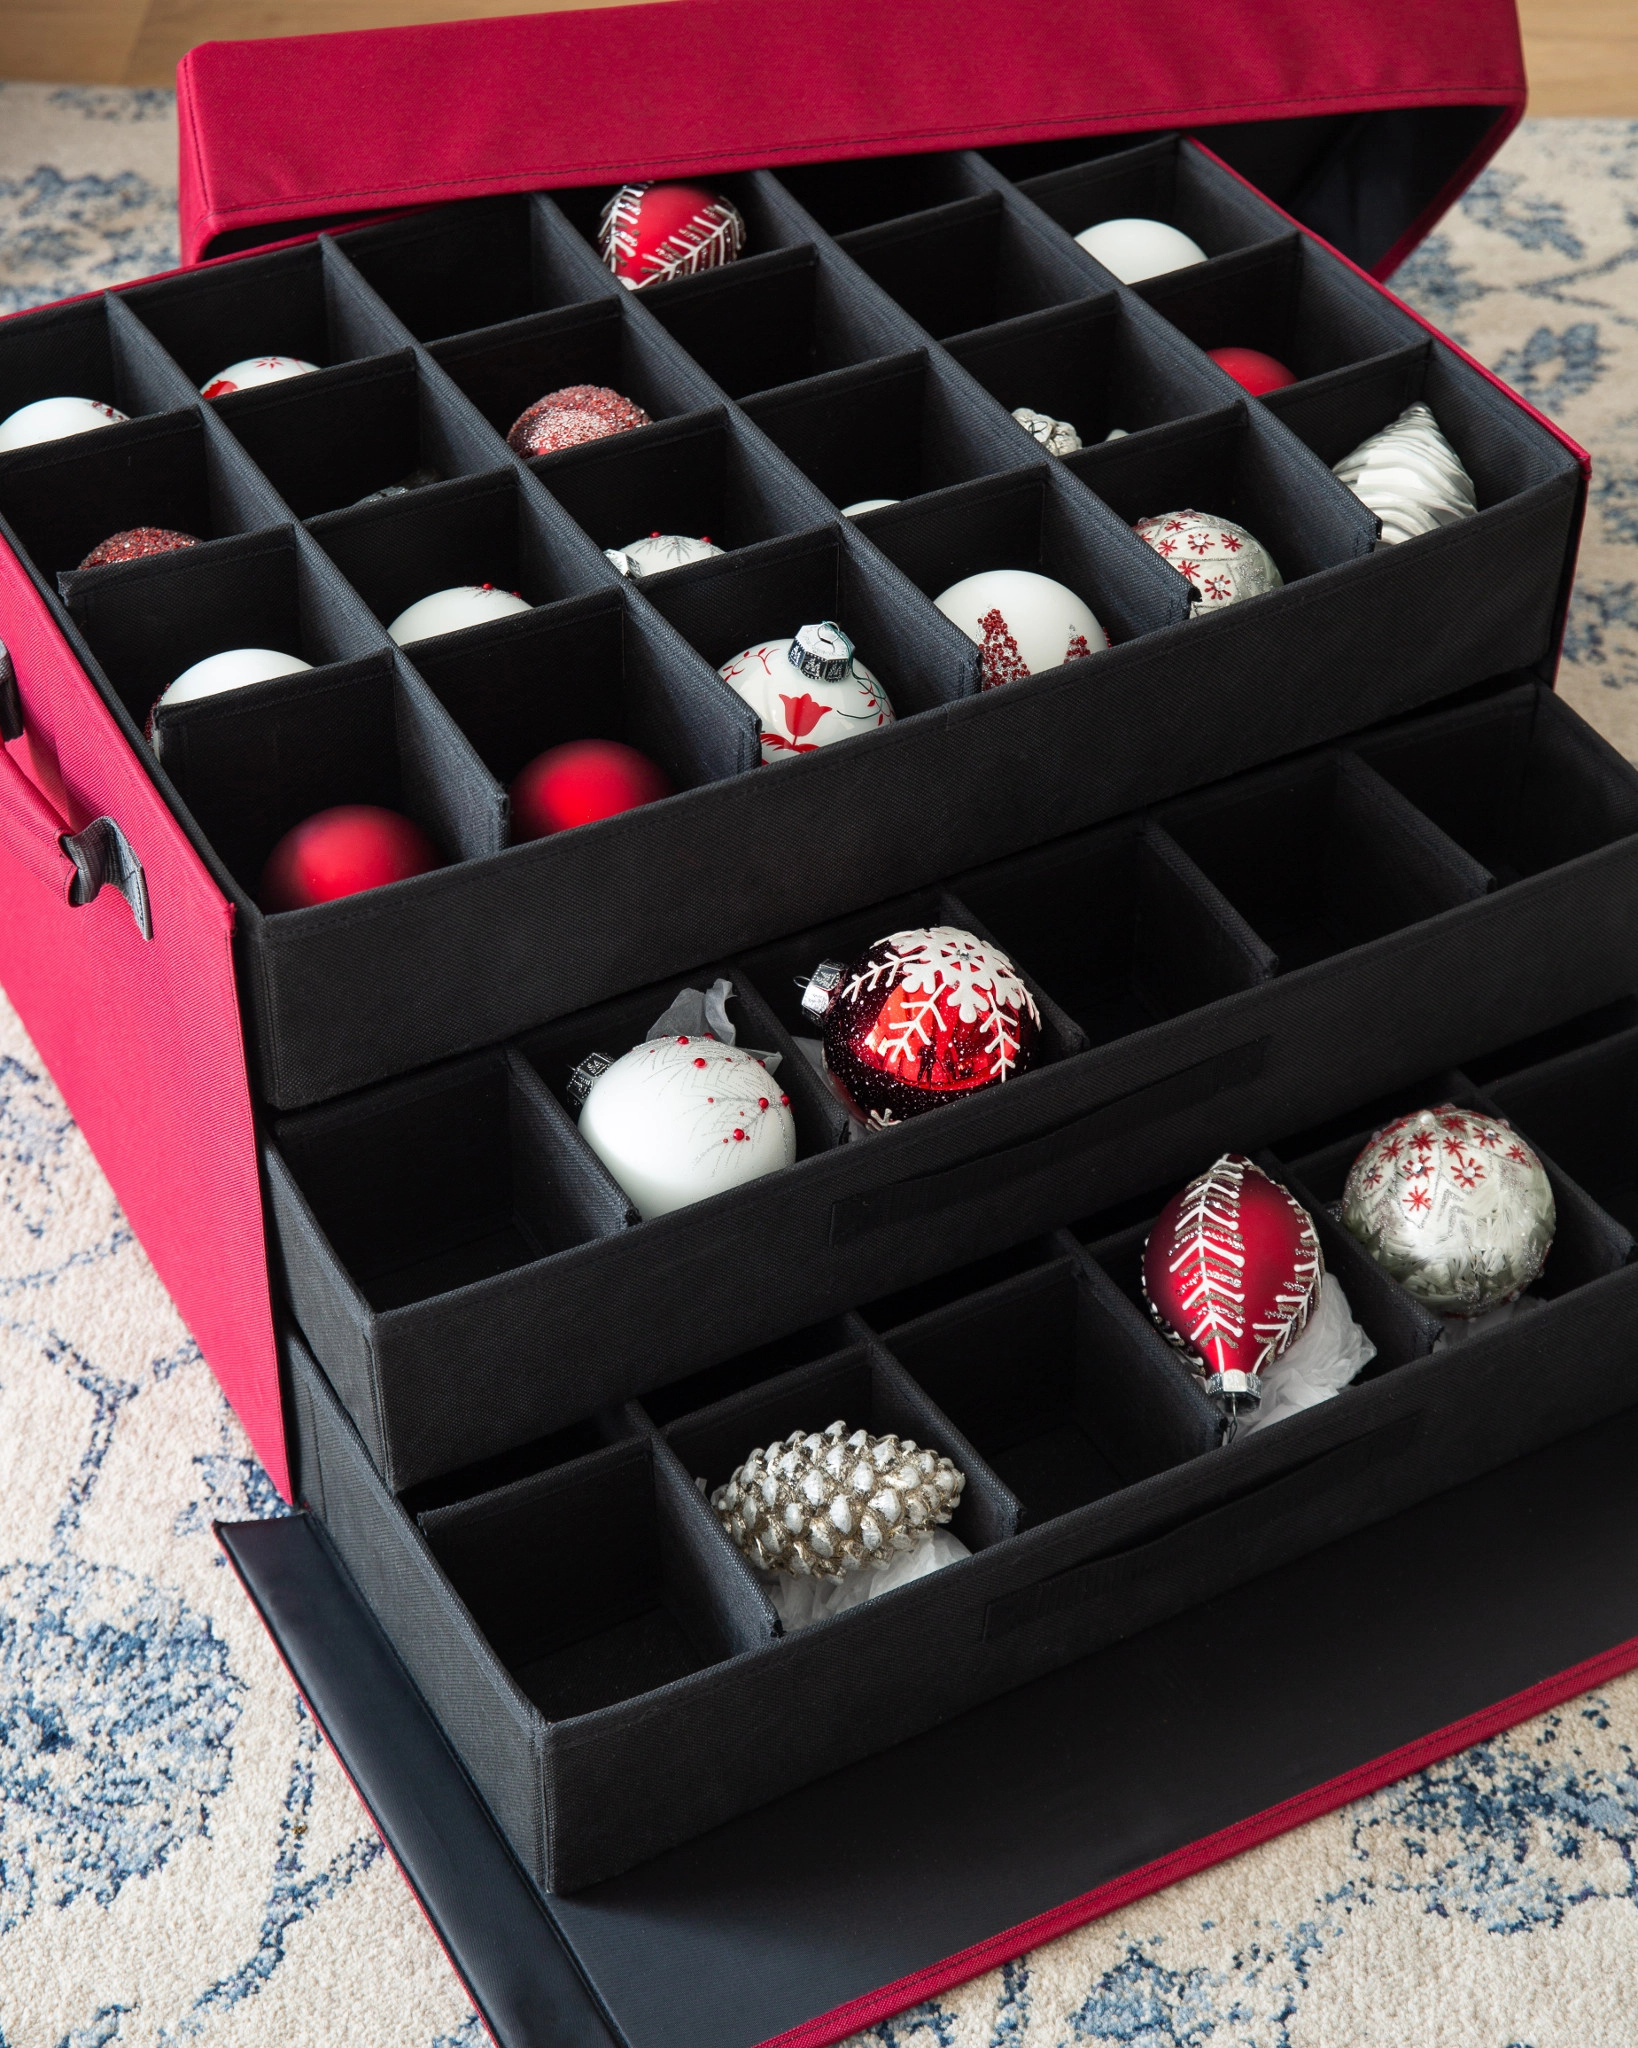 Ornament Storage Box With Dividers For Large Decorations